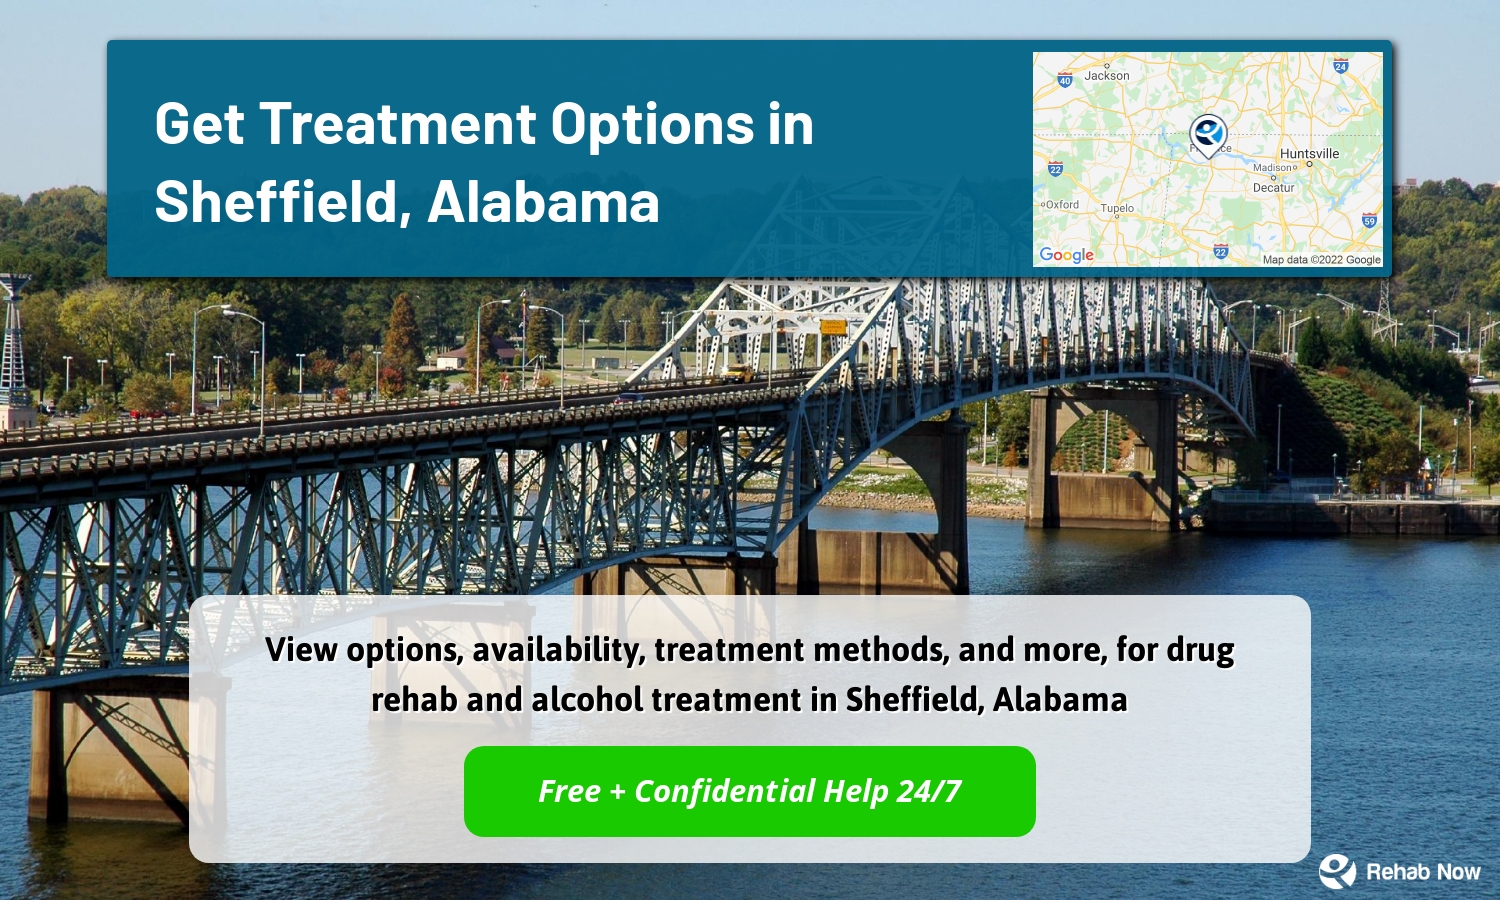 View options, availability, treatment methods, and more, for drug rehab and alcohol treatment in Sheffield, Alabama